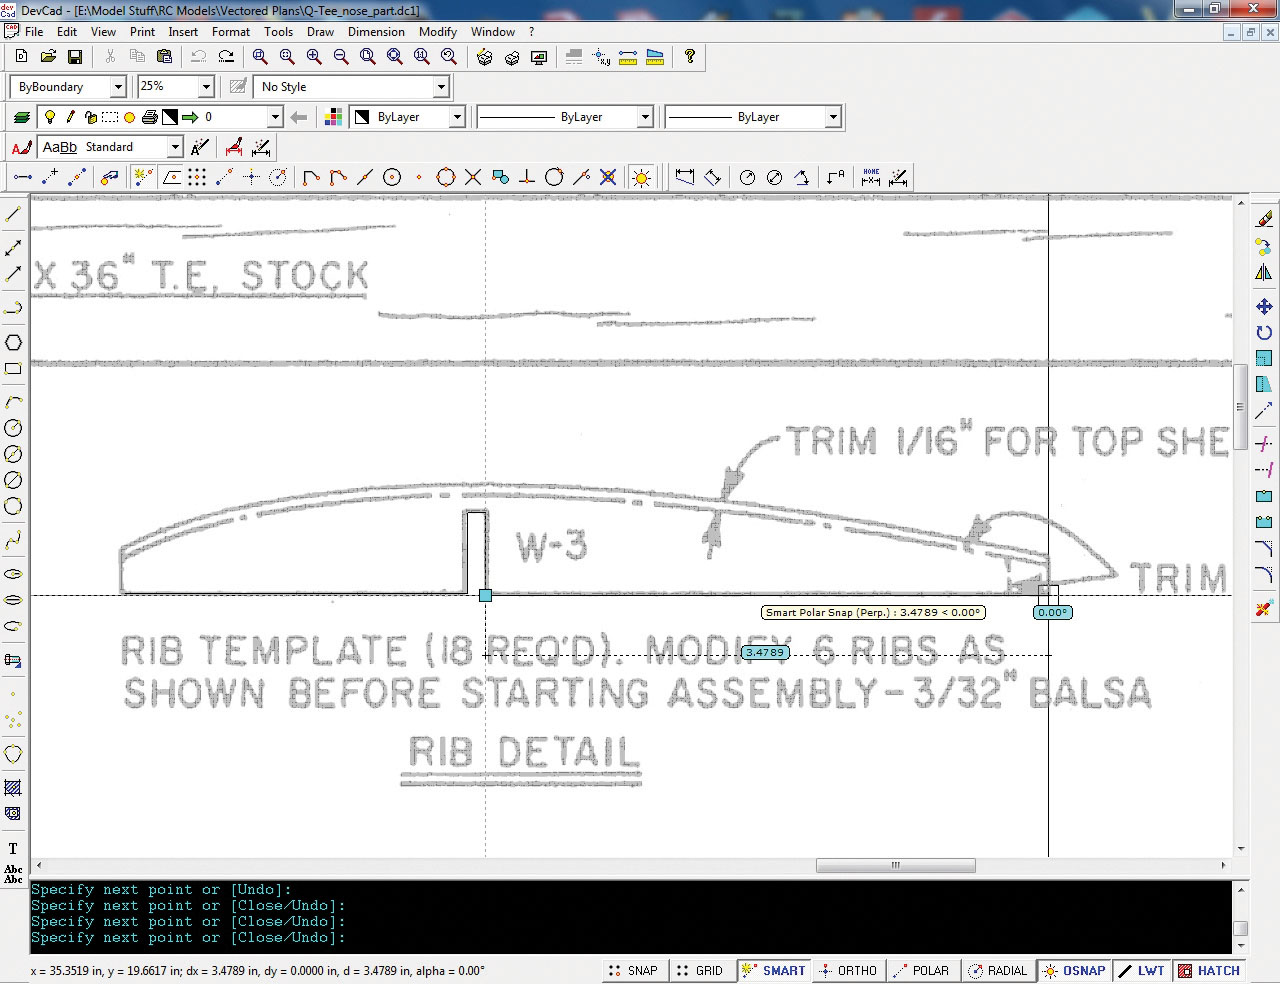 trace over the plans to create a vector file